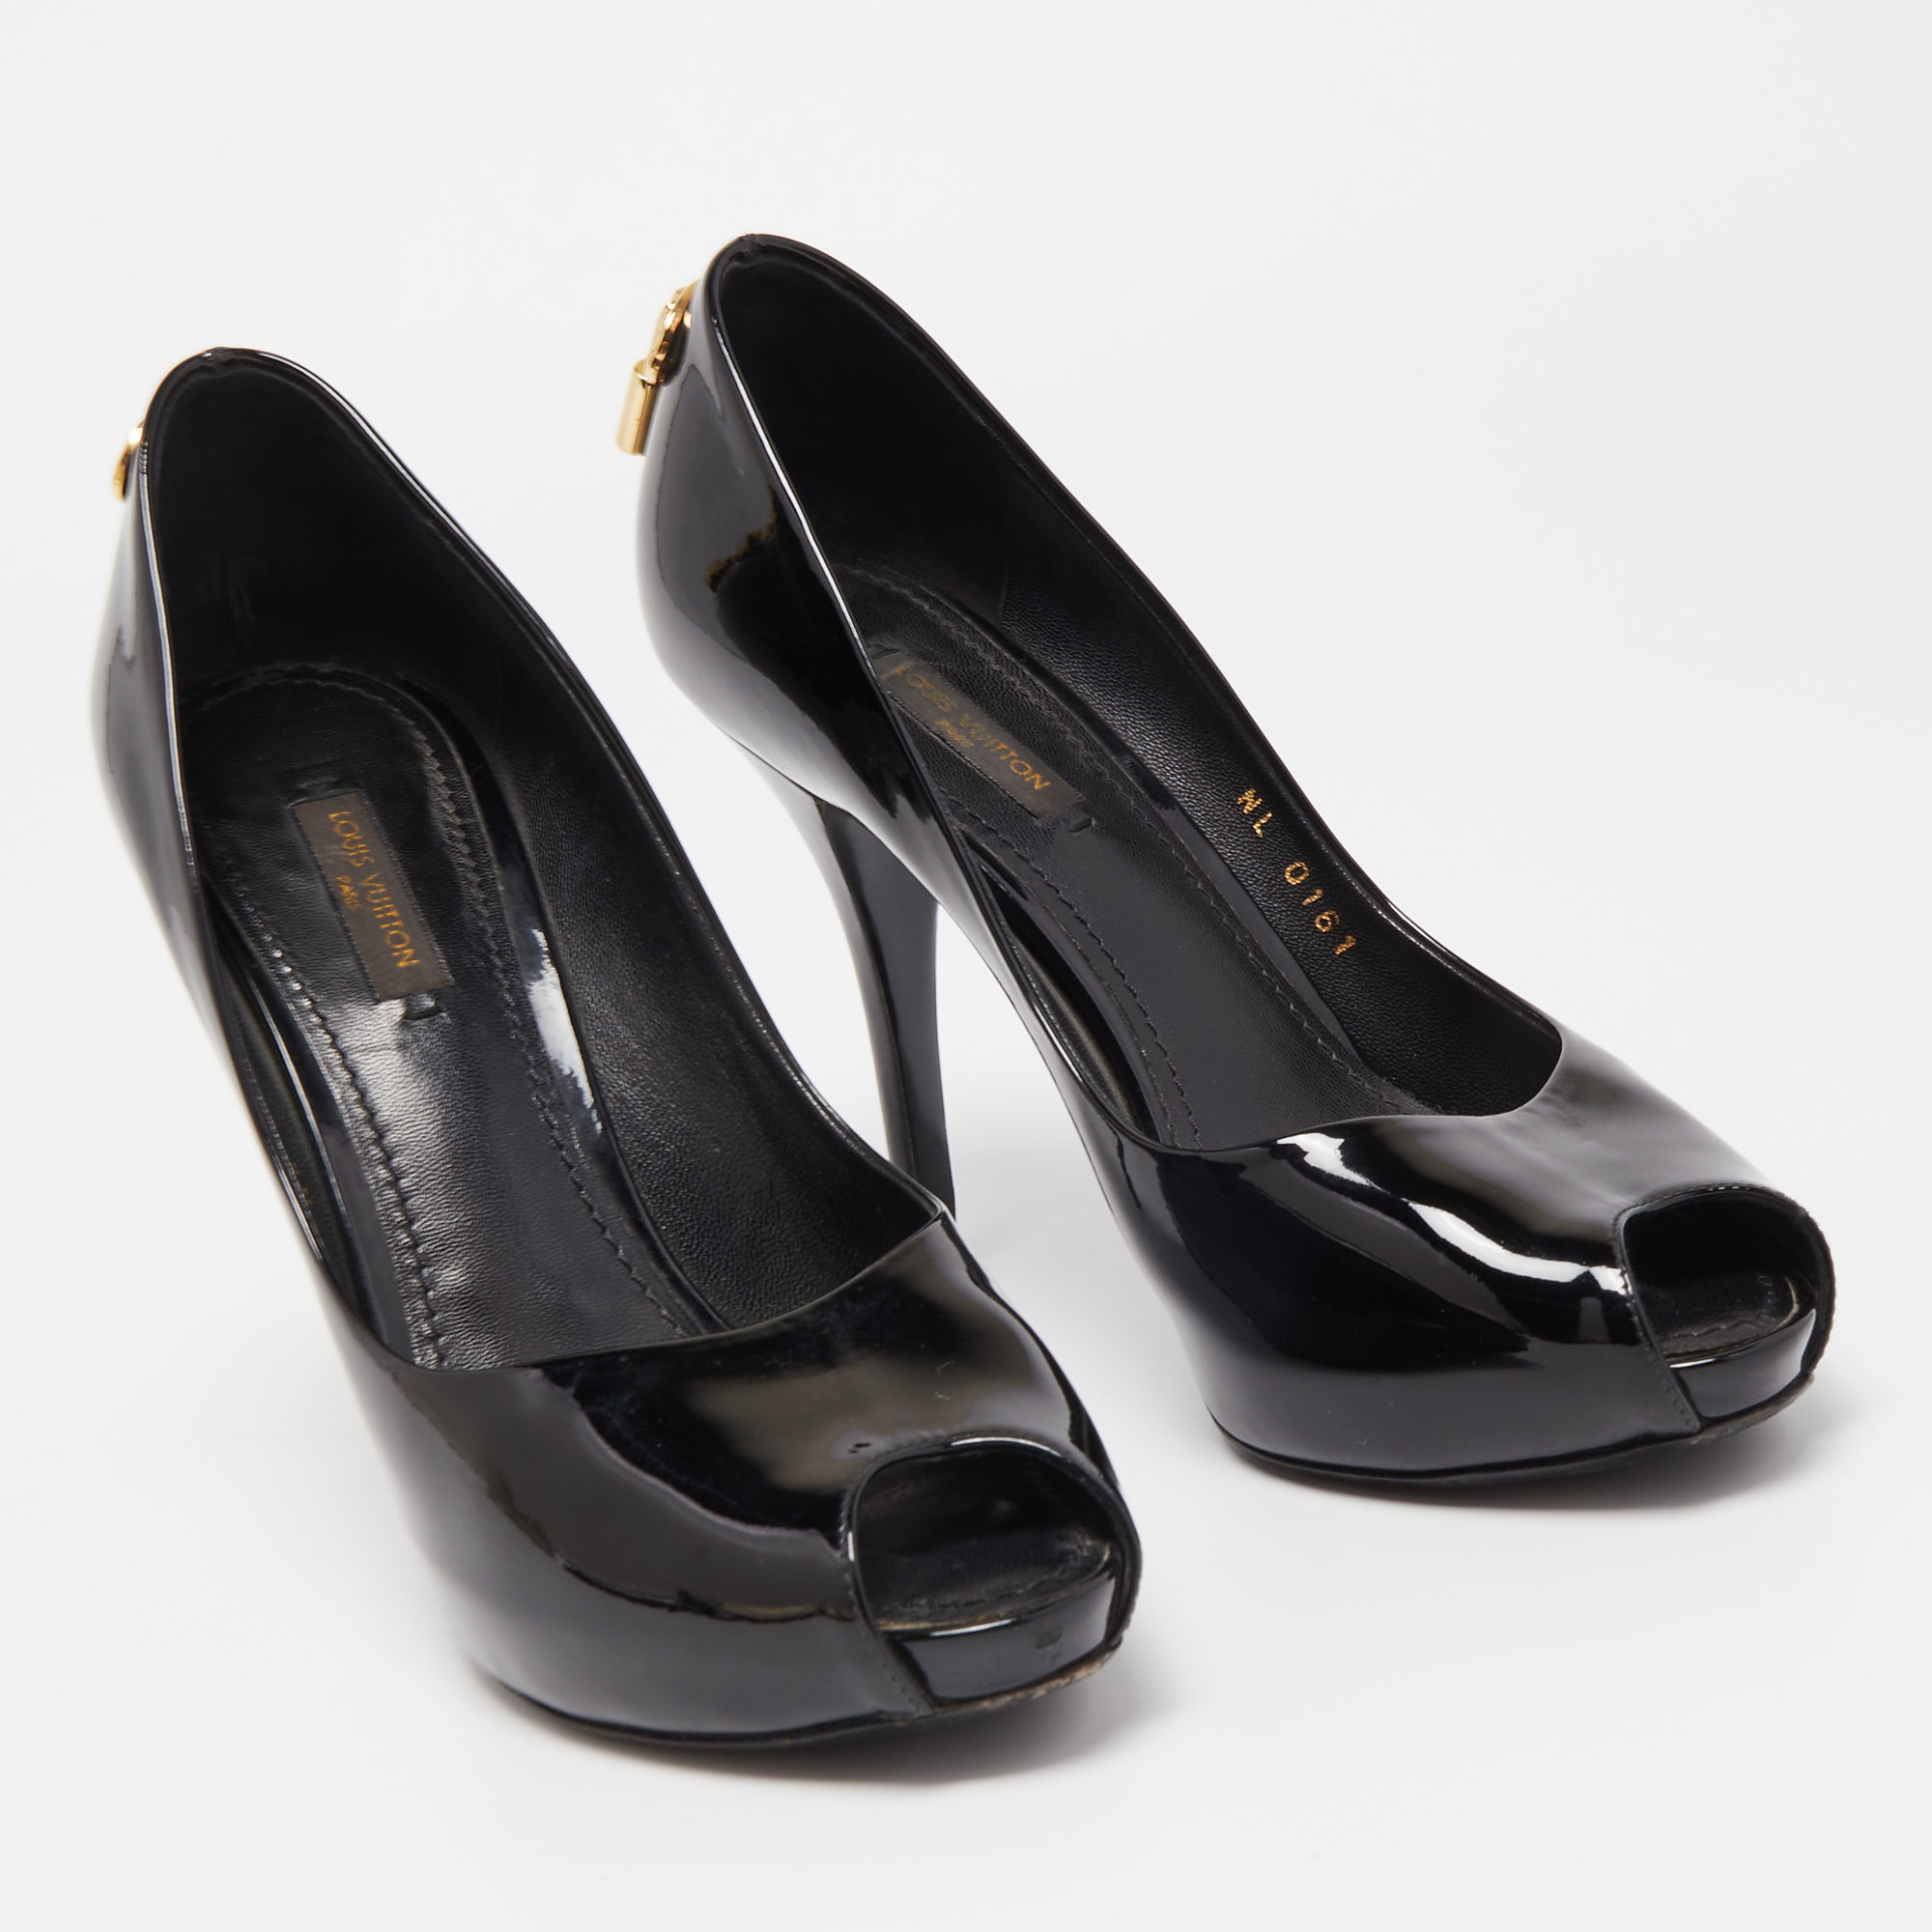 Louis Vuitton Black Patent Leather Oh Really! Pumps Size 37